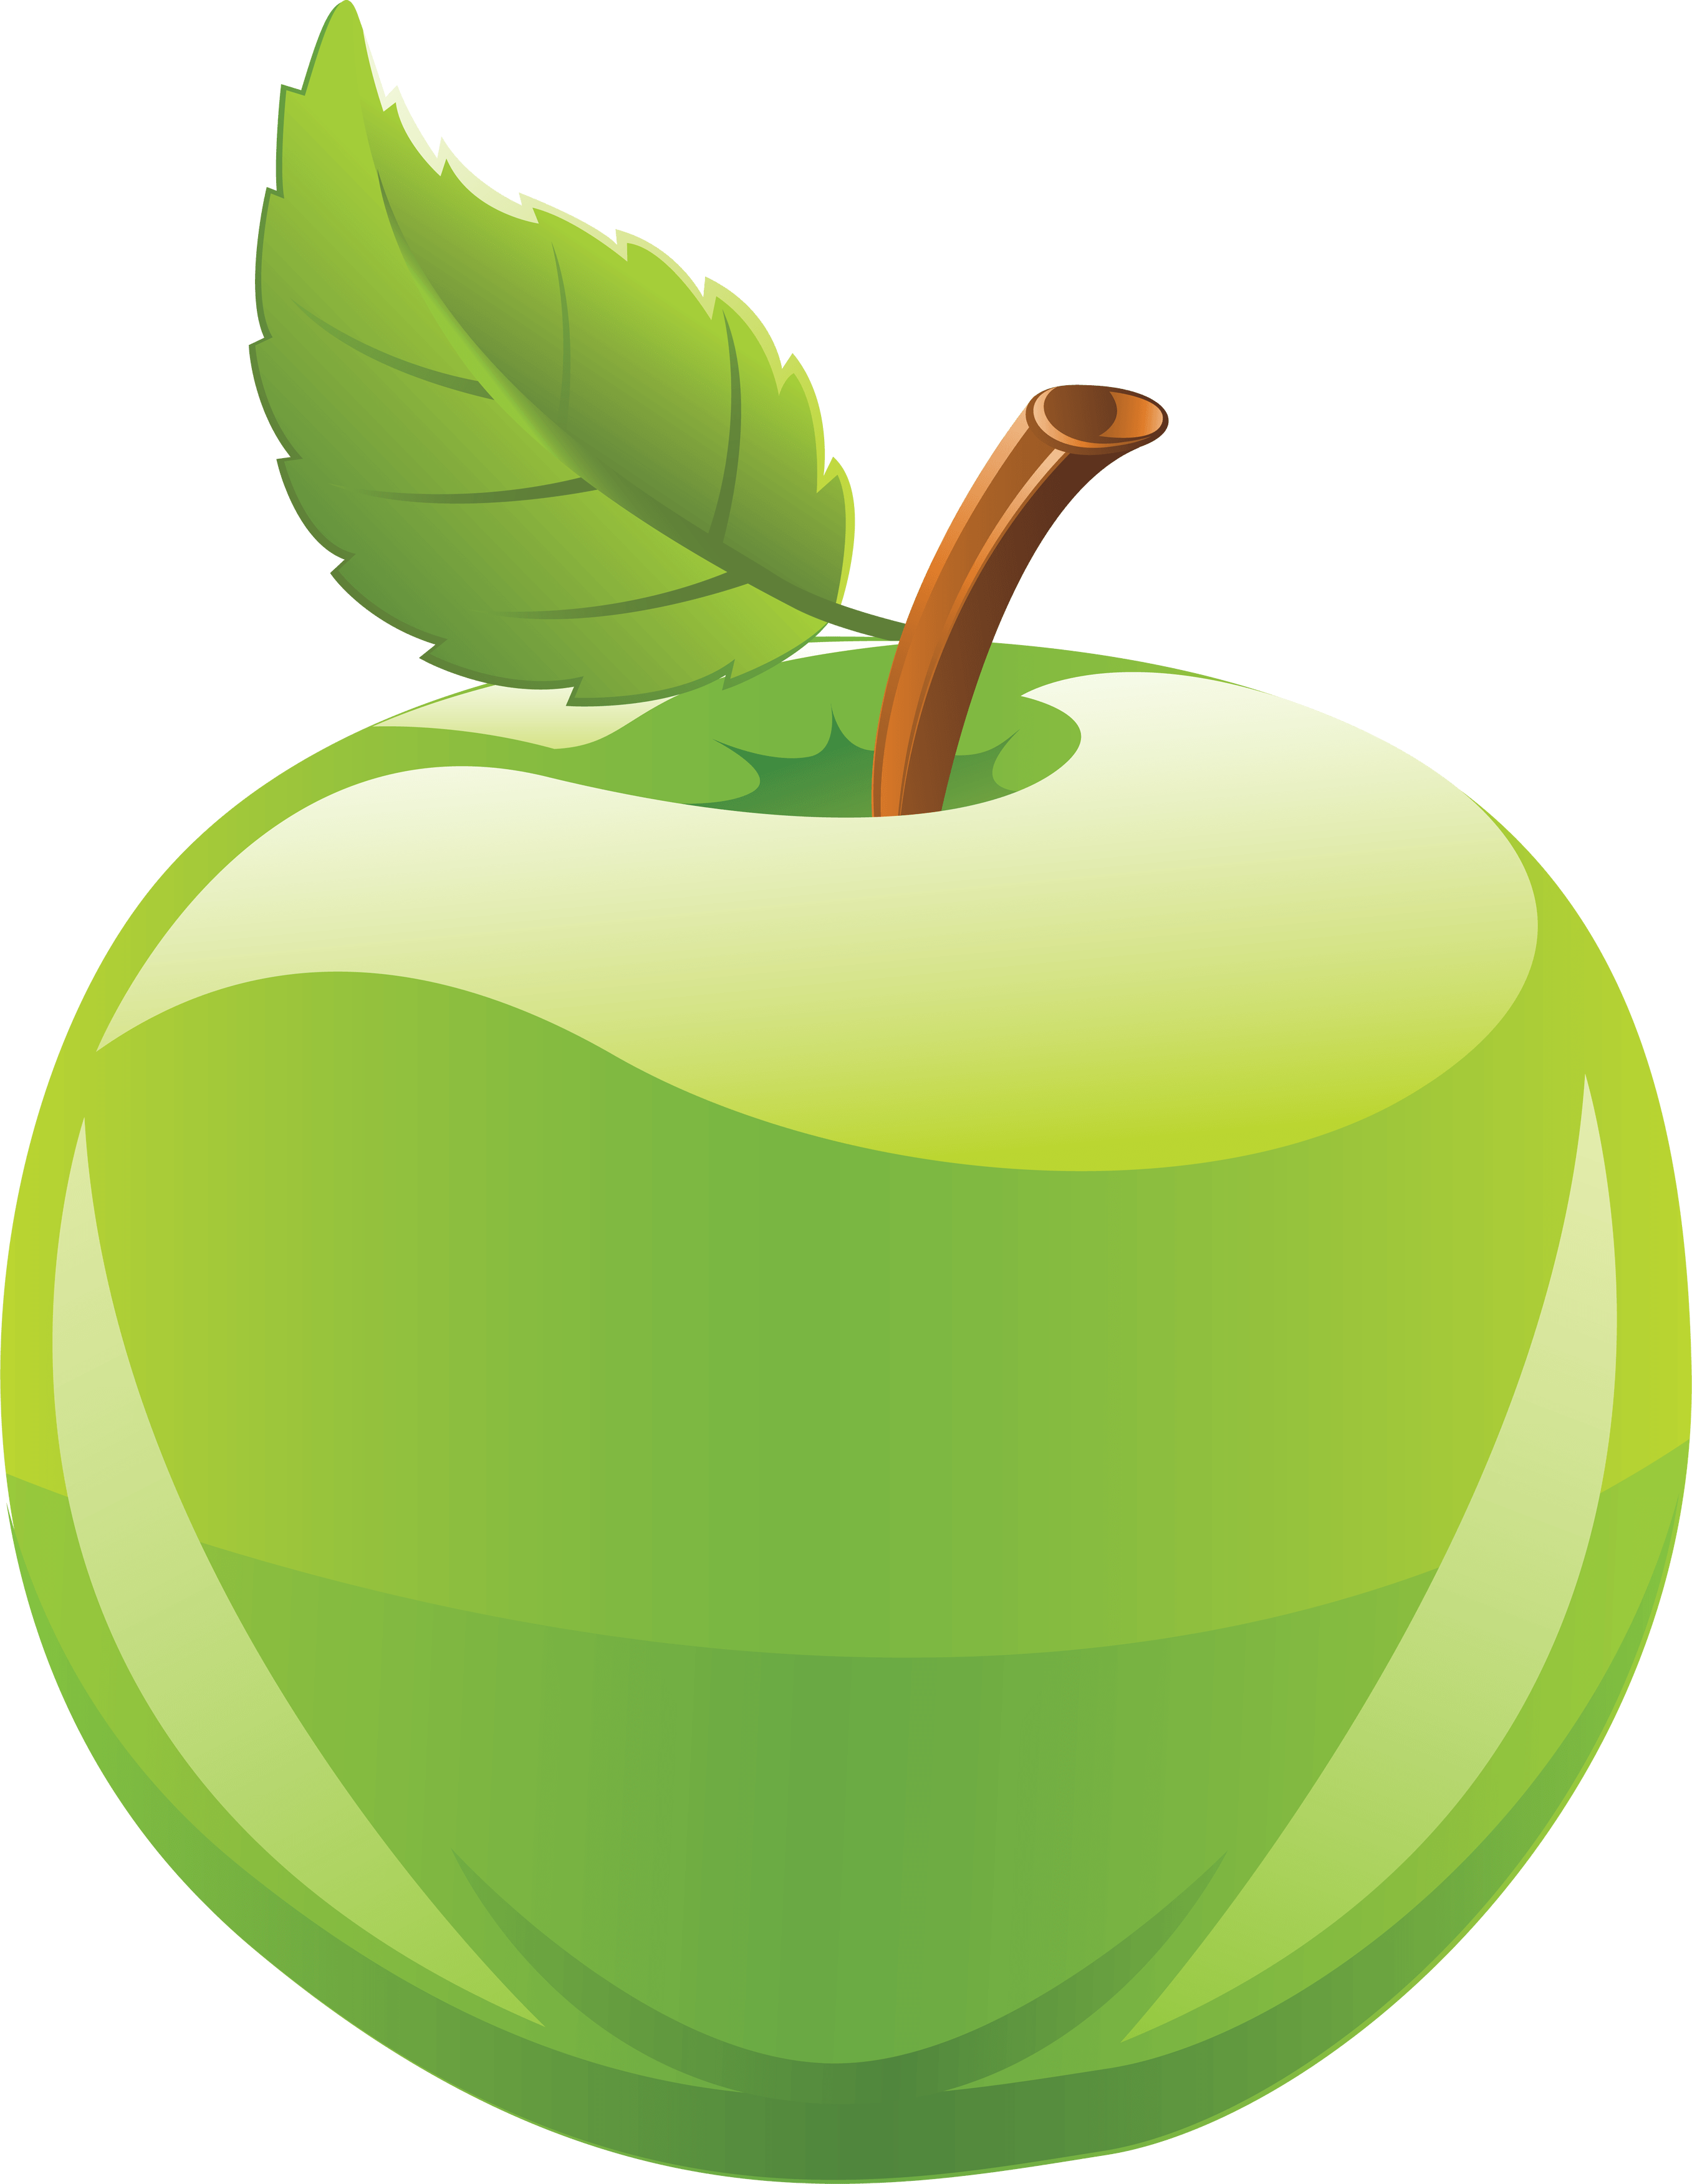 49 Green Apple Png Image.